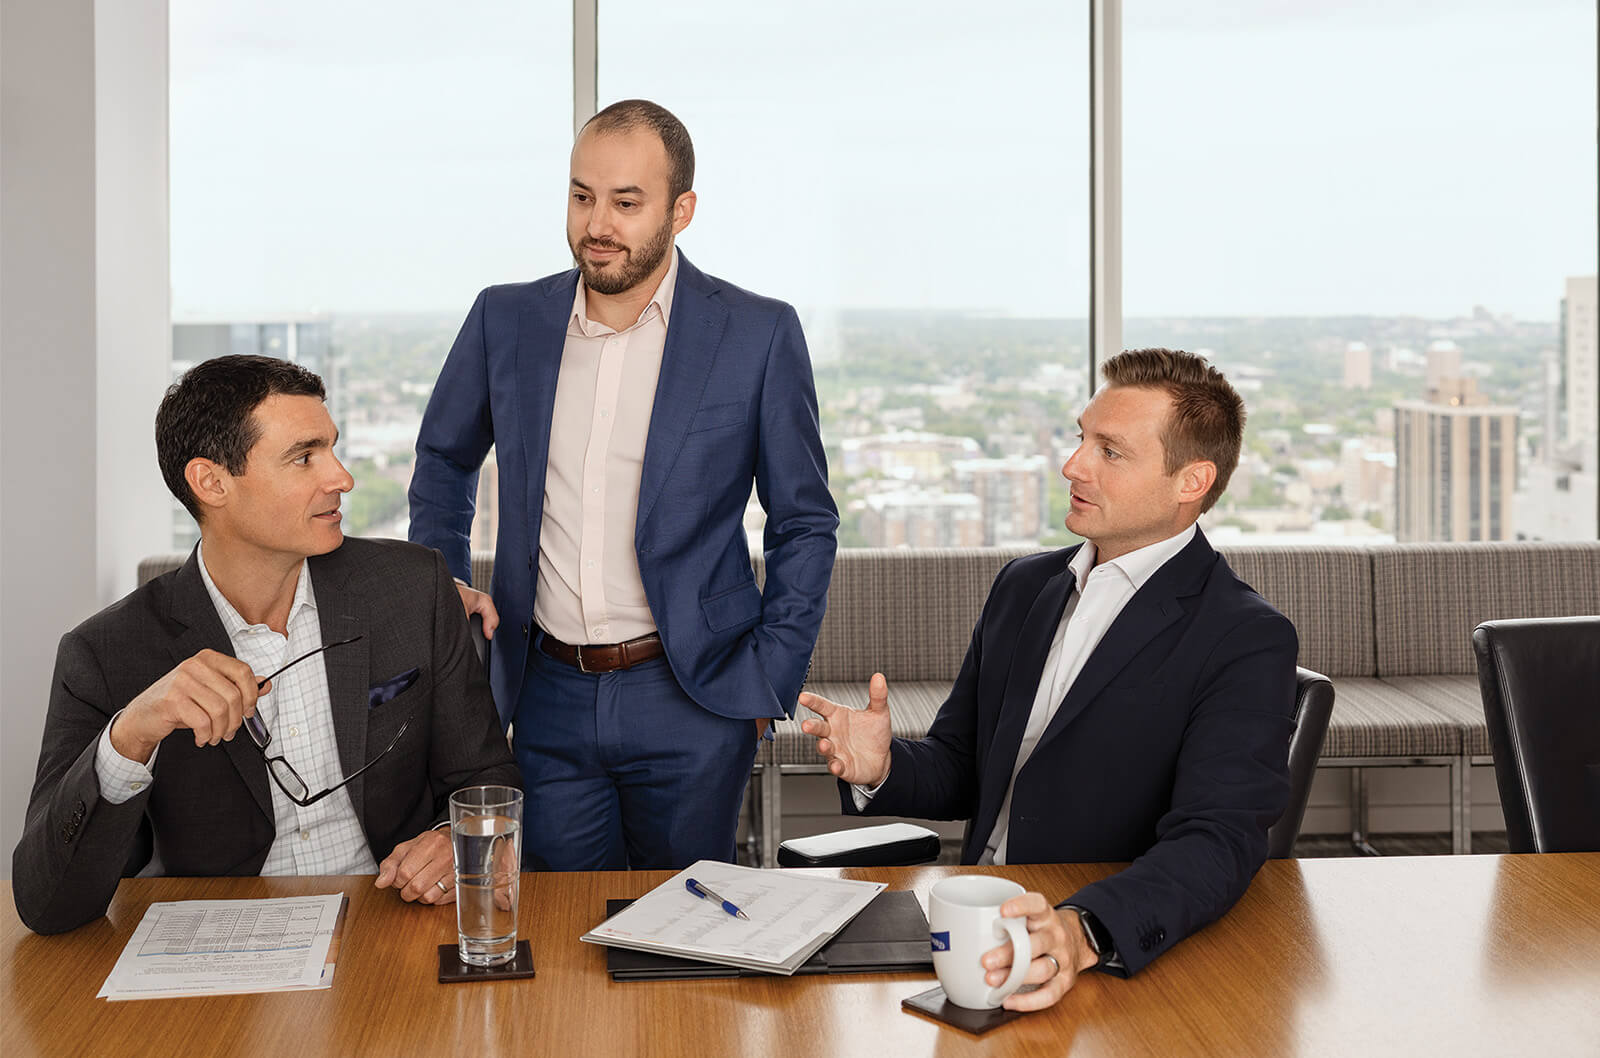 Three associates from the Fixed Income Capital Markets group having a discussion at a conference table